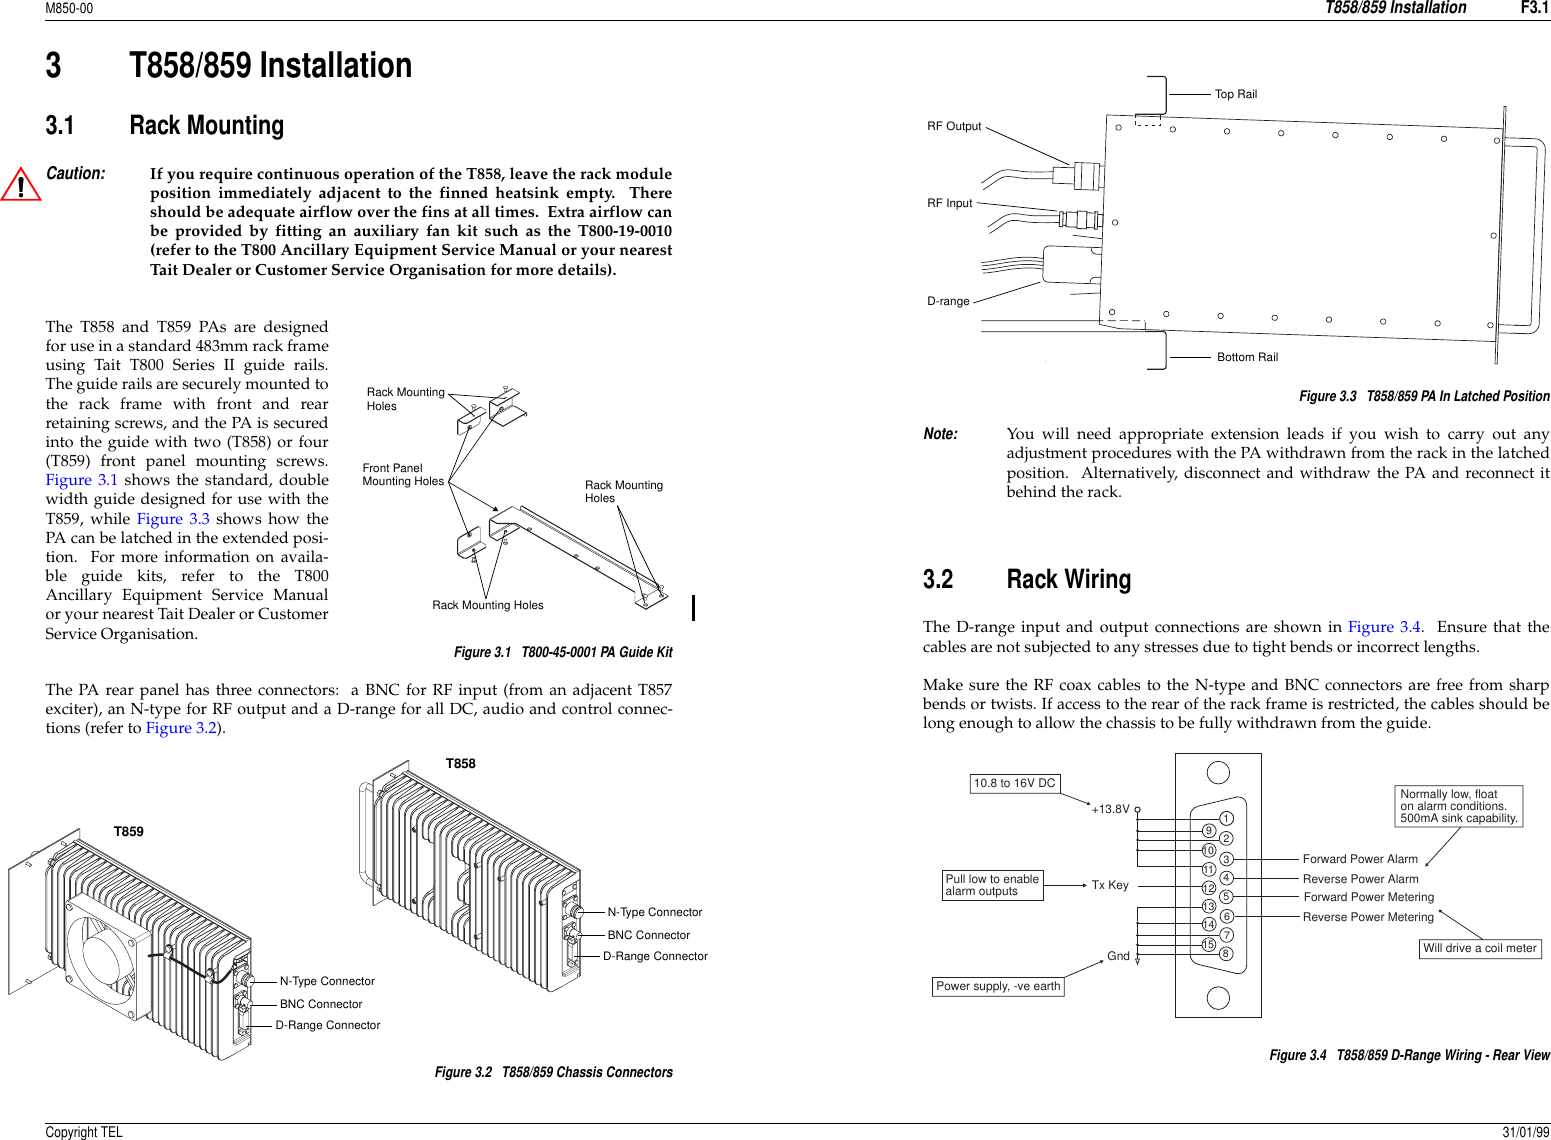 M850-00T858/859 InstallationF3.1Copyright TEL 31/01/993 T858/859 Installation3.1 Rack MountingCaution:If you require continuous operation of the T858, leave the rack moduleposition immediately adjacent to the finned heatsink empty.  Thereshould be adequate airflow over the fins at all times.  Extra airflow canbe provided by fitting an auxiliary fan kit such as the T800-19-0010(refer to the T800 Ancillary Equipment Service Manual or your nearestTait Dealer or Customer Service Organisation for more details).The T858 and T859 PAs are designedfor use in a standard 483mm rack frameusing Tait T800 Series II guide rails.The guide rails are securely mounted tothe rack frame with front and rearretaining screws, and the PA is securedinto the guide with two (T858) or four(T859) front panel mounting screws.Figure 3.1 shows the standard, doublewidth guide designed for use with theT859, while Figure 3.3 shows how thePA can be latched in the extended posi-tion.  For more information on availa-ble guide kits, refer to the T800Ancillary Equipment Service Manualor your nearest Tait Dealer or CustomerService Organisation.  Figure 3.1   T800-45-0001 PA Guide KitThe PA rear panel has three connectors:  a BNC for RF input (from an adjacent T857exciter), an N-type for RF output and a D-range for all DC, audio and control connec-tions (refer to Figure 3.2).Figure 3.2   T858/859 Chassis ConnectorsFigure 3.3   T858/859 PA In Latched PositionNote:You will need appropriate extension leads if you wish to carry out anyadjustment procedures with the PA withdrawn from the rack in the latchedposition.  Alternatively, disconnect and withdraw the PA and reconnect itbehind the rack.3.2 Rack WiringThe D-range input and output connections are shown in Figure 3.4.  Ensure that thecables are not subjected to any stresses due to tight bends or incorrect lengths.Make sure the RF coax cables to the N-type and BNC connectors are free from sharpbends or twists. If access to the rear of the rack frame is restricted, the cables should belong enough to allow the chassis to be fully withdrawn from the guide.Figure 3.4   T858/859 D-Range Wiring - Rear ViewFront PanelMounting HolesRack MountingHolesRack MountingHolesRack Mounting HolesN-Type ConnectorBNC ConnectorD-Range ConnectorN-Type ConnectorBNC ConnectorD-Range ConnectorT858T859RF OutputRF InputD-rangeTop RailBottom Rail123456789101112131415Normally low, floaton alarm conditions.500mA sink capability.Pull low to enablealarm outputsPower supply, -ve earthWill drive a coil meter10.8 to 16V DCReverse Power MeteringForward Power MeteringReverse Power AlarmForward Power AlarmTx Key +13.8VGnd